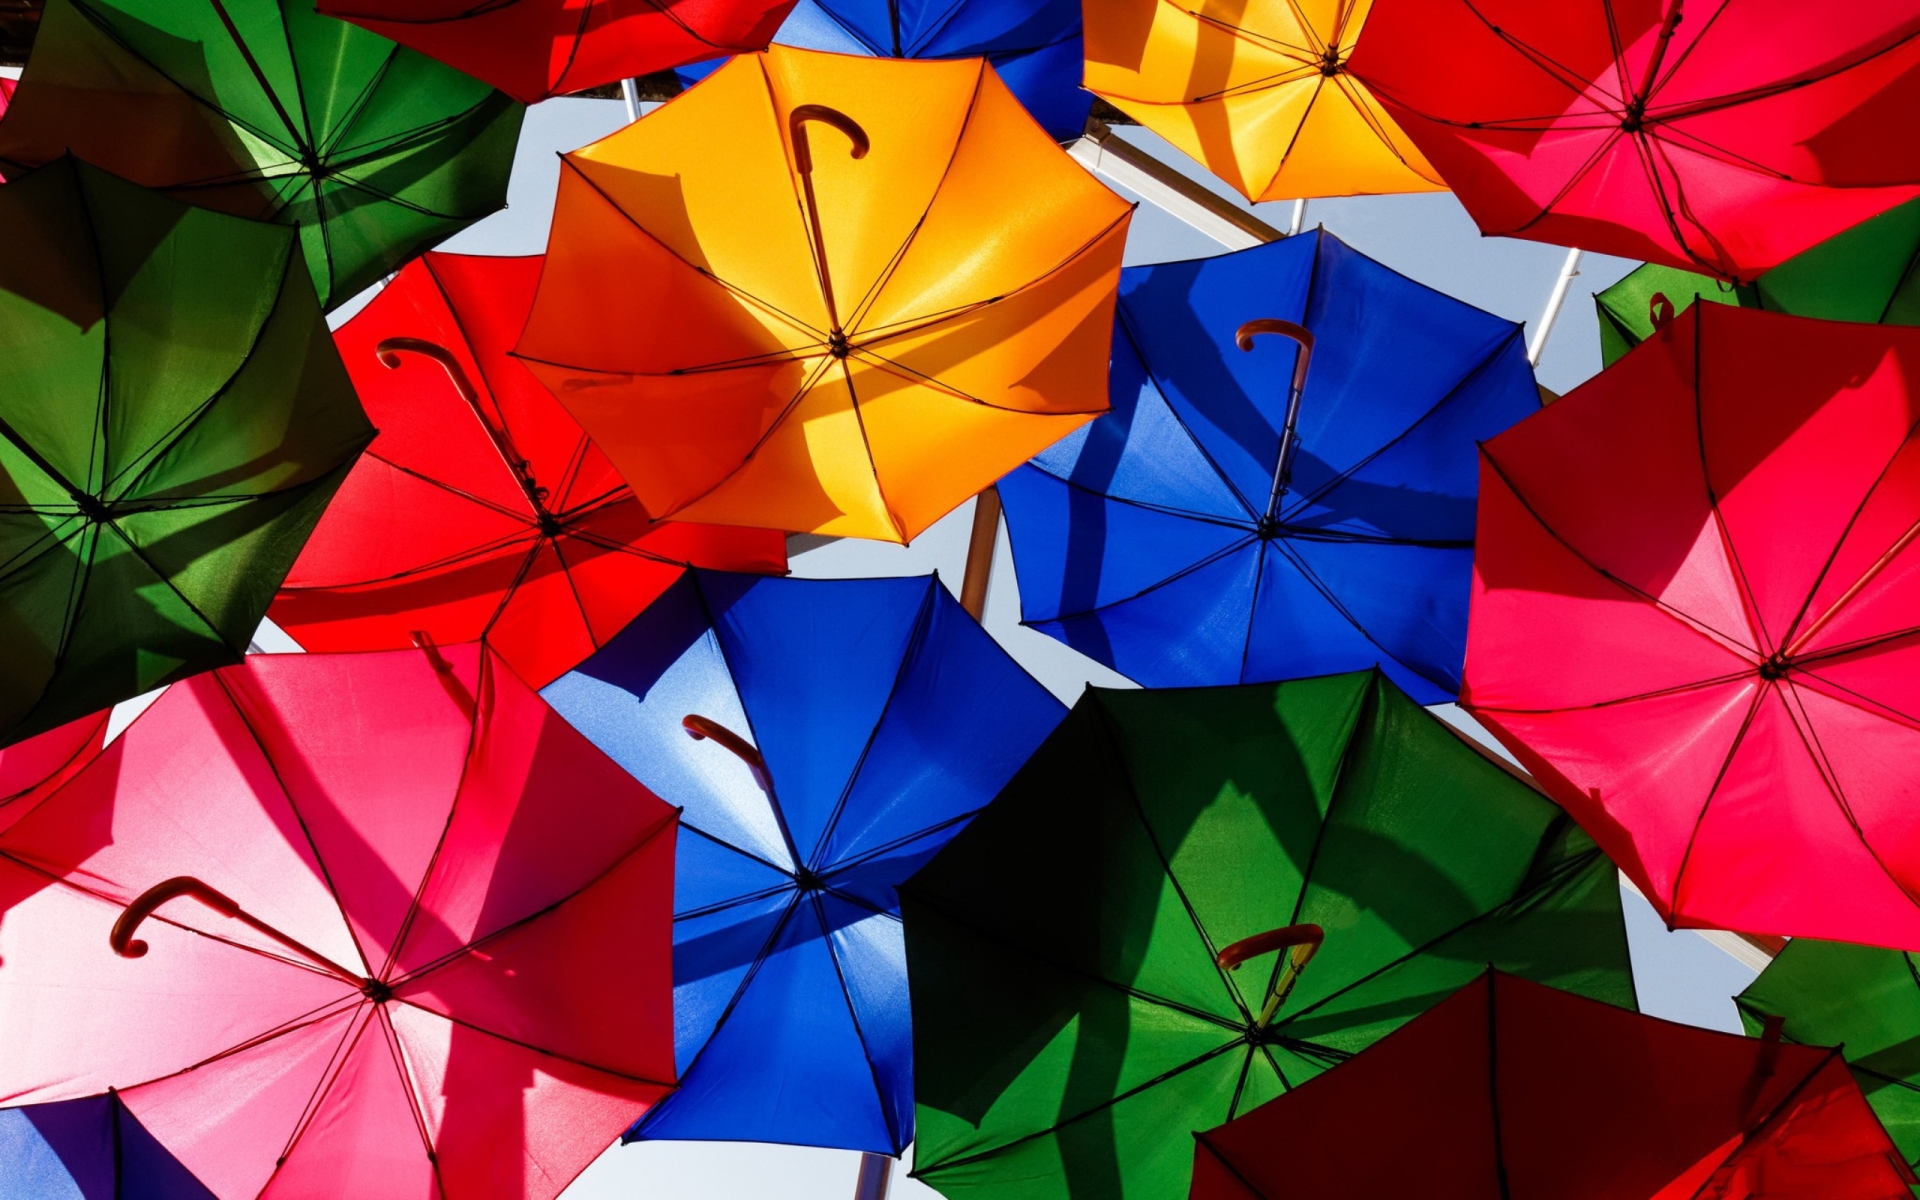 wallpaper from gallery,umbrella,blue,red,origami,origami paper